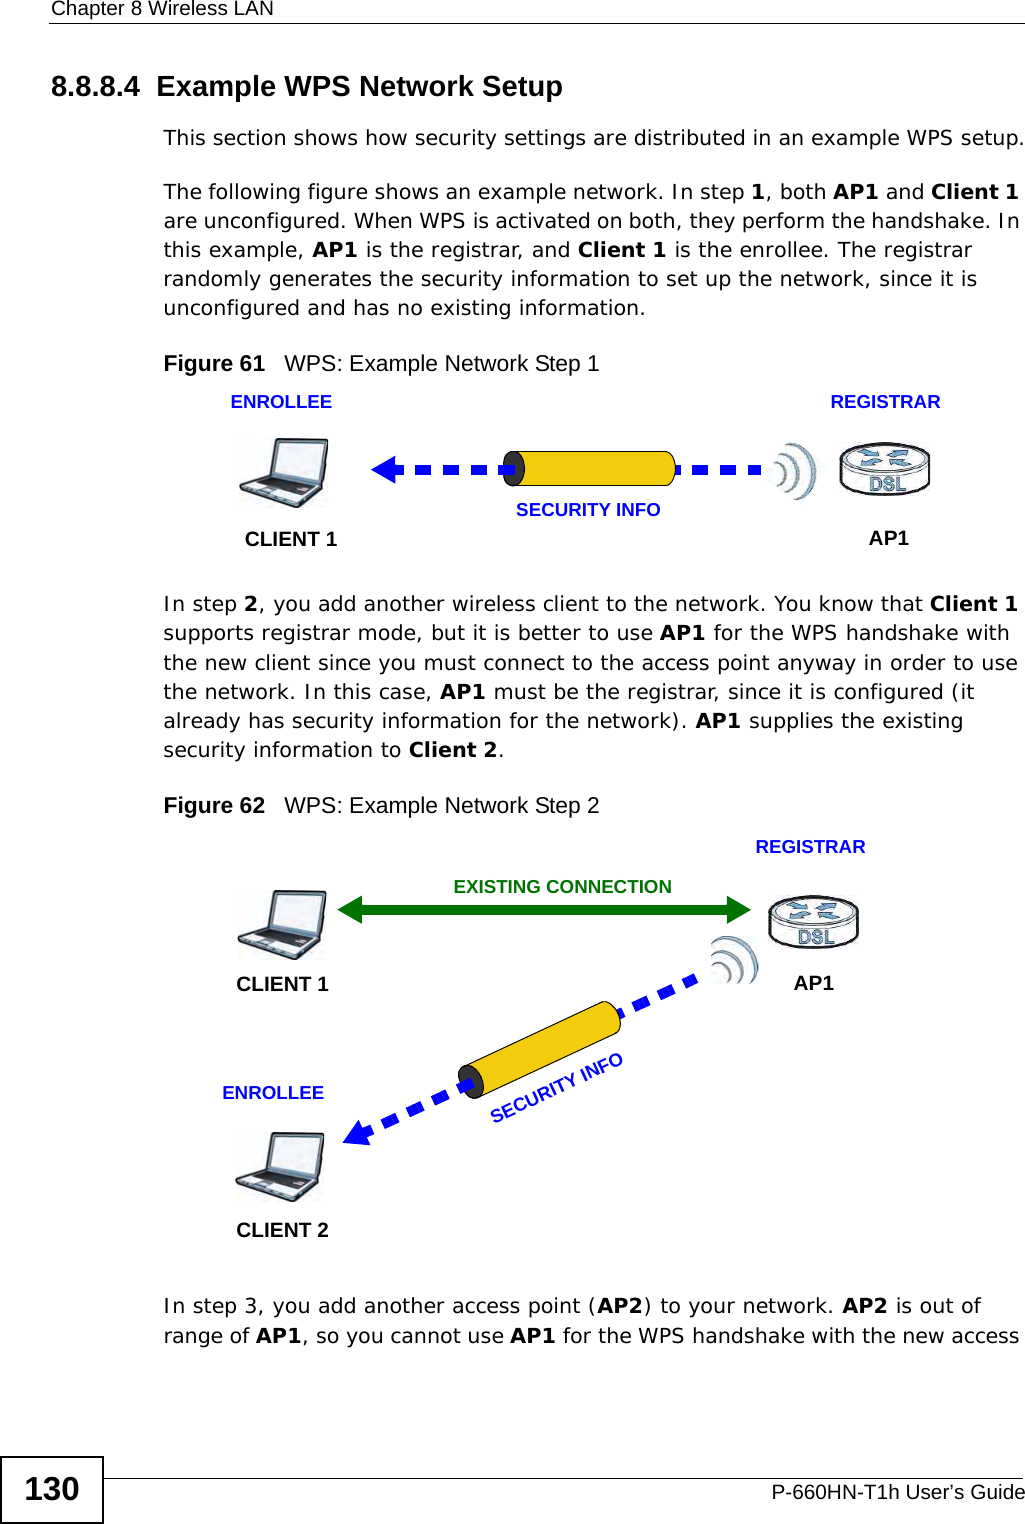 Chapter 8 Wireless LANP-660HN-T1h User’s Guide1308.8.8.4  Example WPS Network SetupThis section shows how security settings are distributed in an example WPS setup.The following figure shows an example network. In step 1, both AP1 and Client 1 are unconfigured. When WPS is activated on both, they perform the handshake. In this example, AP1 is the registrar, and Client 1 is the enrollee. The registrar randomly generates the security information to set up the network, since it is unconfigured and has no existing information.Figure 61   WPS: Example Network Step 1In step 2, you add another wireless client to the network. You know that Client 1 supports registrar mode, but it is better to use AP1 for the WPS handshake with the new client since you must connect to the access point anyway in order to use the network. In this case, AP1 must be the registrar, since it is configured (it already has security information for the network). AP1 supplies the existing security information to Client 2.Figure 62   WPS: Example Network Step 2In step 3, you add another access point (AP2) to your network. AP2 is out of range of AP1, so you cannot use AP1 for the WPS handshake with the new access REGISTRARENROLLEESECURITY INFOCLIENT 1 AP1REGISTRARCLIENT 1 AP1ENROLLEECLIENT 2EXISTING CONNECTIONSECURITY INFO